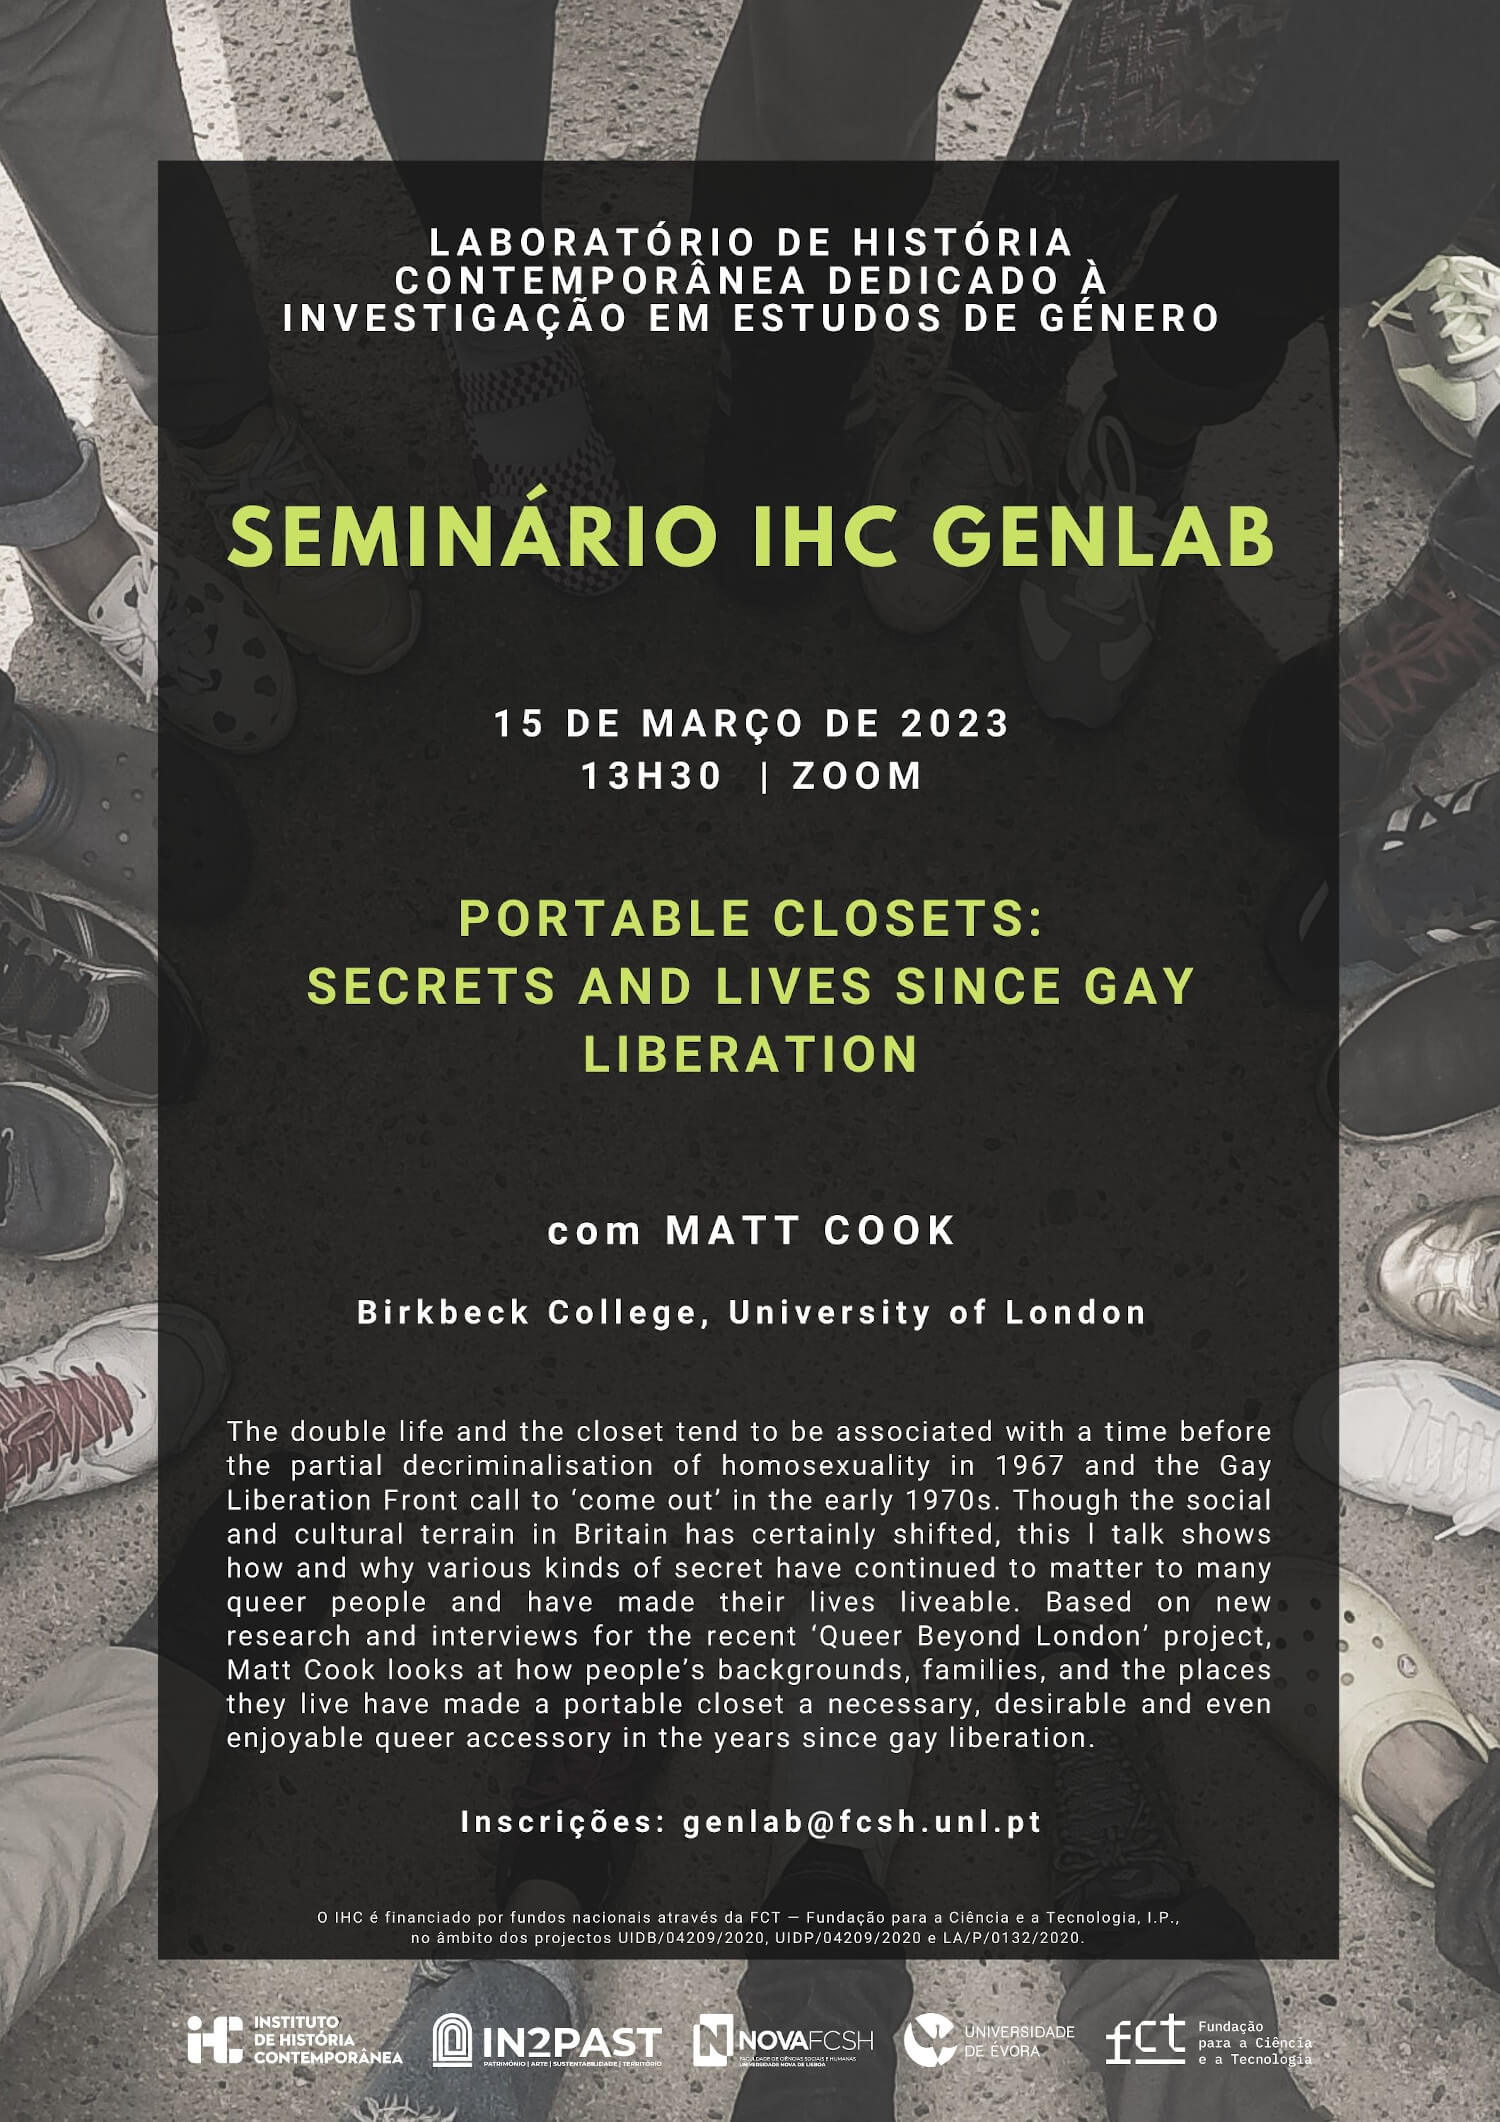 Cartaz do seminário do GenLab "Portable closets: Secrets and lives since gay liberation", com Matt Cook. 15 de Março de 2023 às 13 horas e 30, via Zoom. Inclui o texto de apresentação: “The double life and the closet tend to be associated with a time before the partial decriminalisation of homosexuality in 1967 and the Gay Liberation Front call to ‘come out’ in the early 1970s. Though the social and cultural terrain in Britain has certainly shifted, this l talk shows how and why various kinds of secret have continued to matter to many queer people and have made their lives liveable. Based on new research and interviews for the recent ‘Queer Beyond London’ project, Matt Cook looks at how people’s backgrounds, families, and the places they live have made a portable closet a necessary, desirable and even enjoyable queer accessory in the years since gay liberation.”